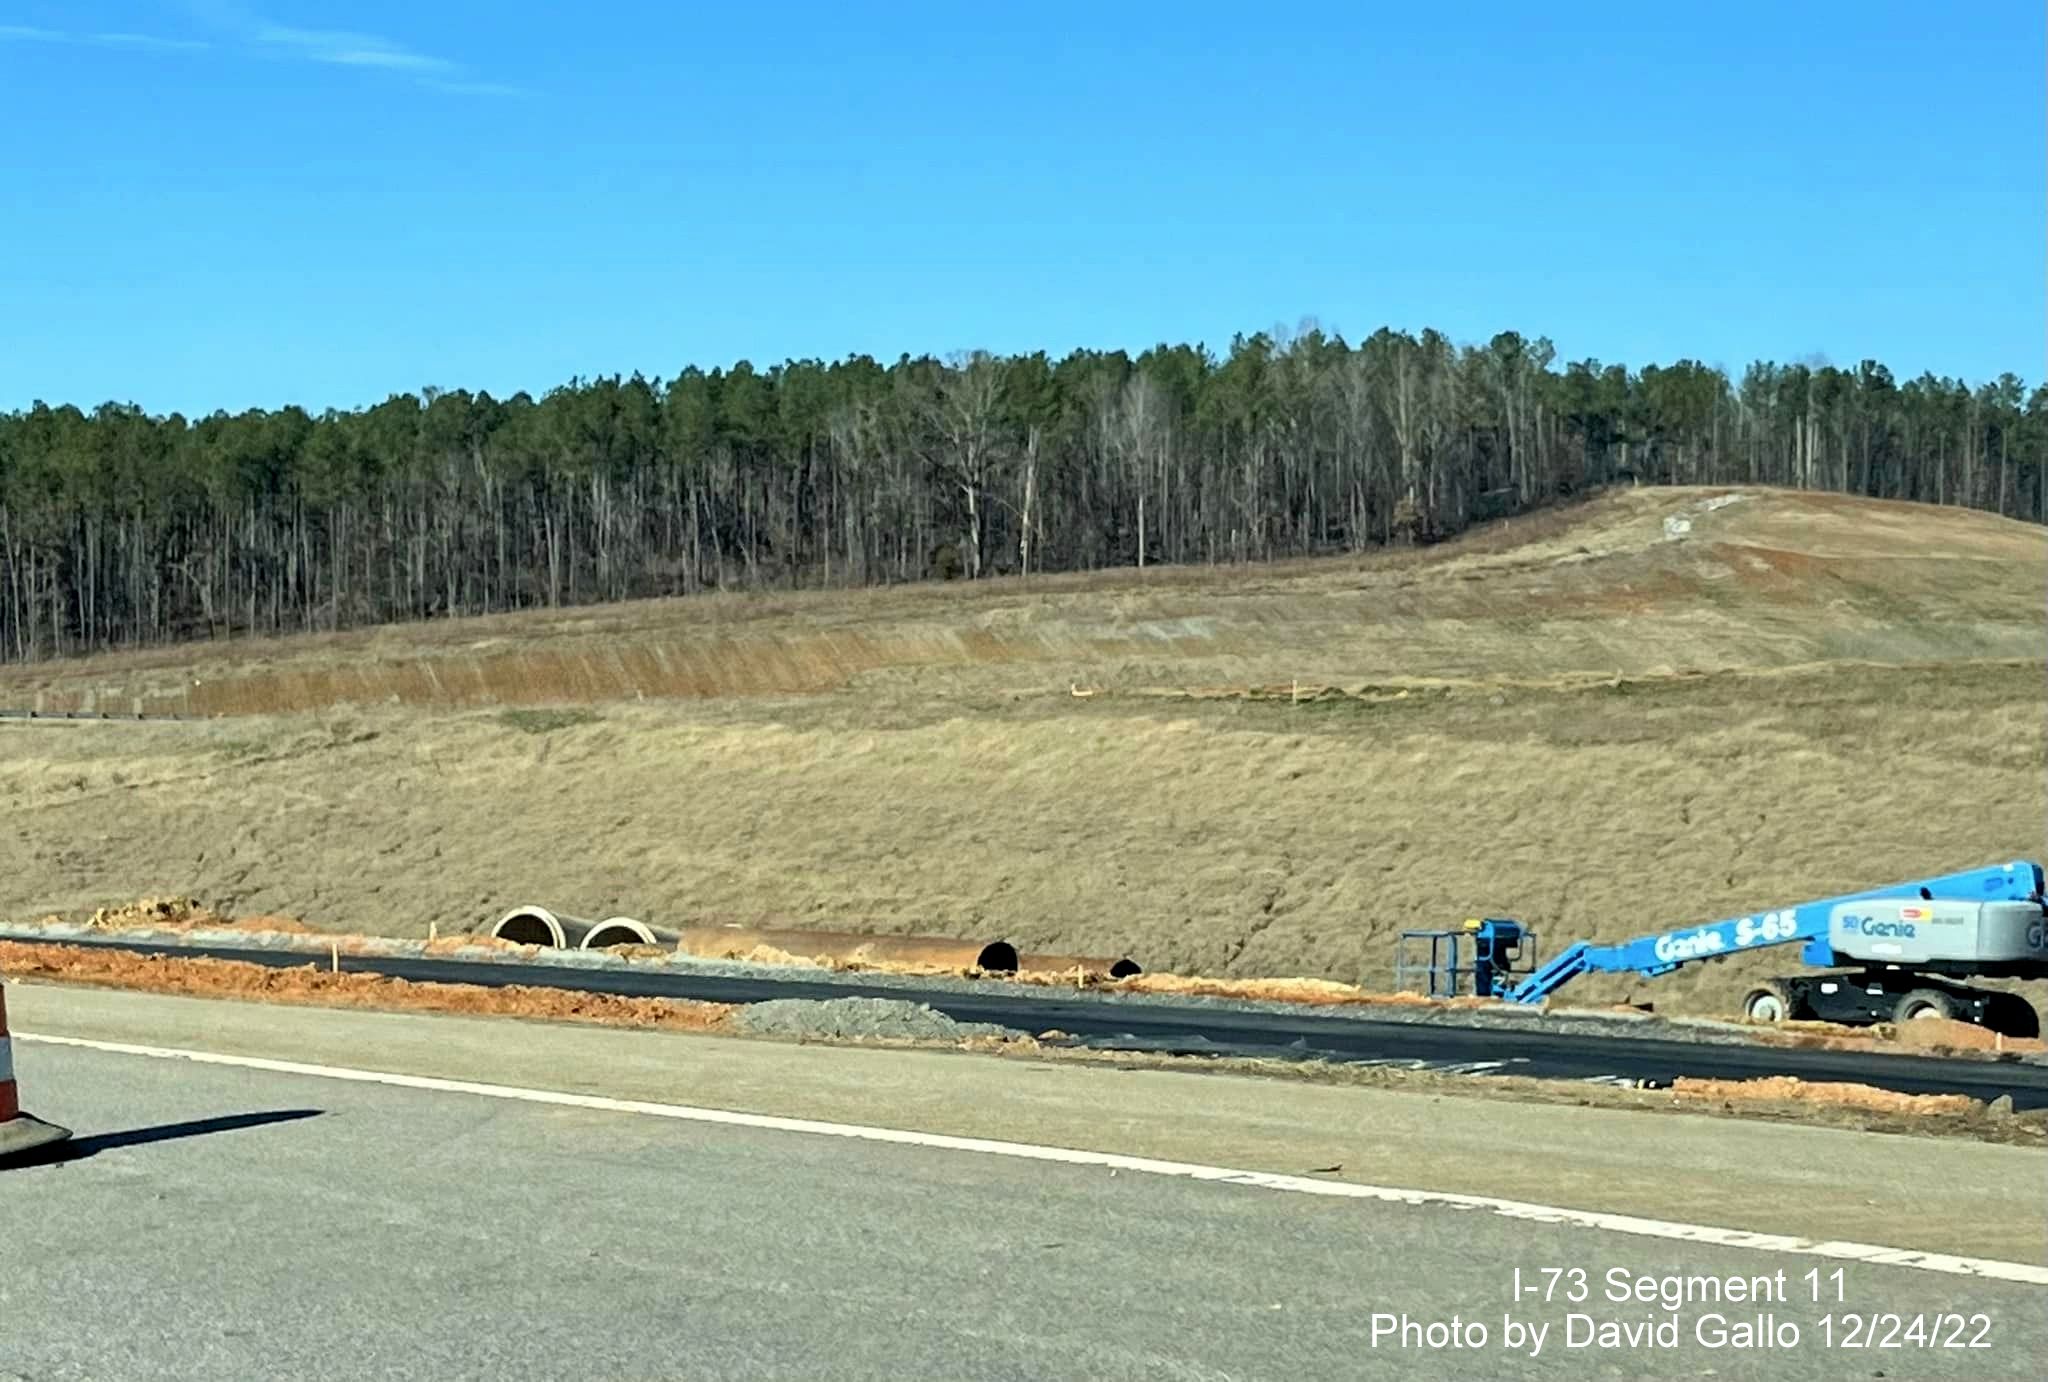 Image of I-73/I-74 Rockingham Bypass construction from US 74 West, 
                                            photo by David Gallo, December 2022